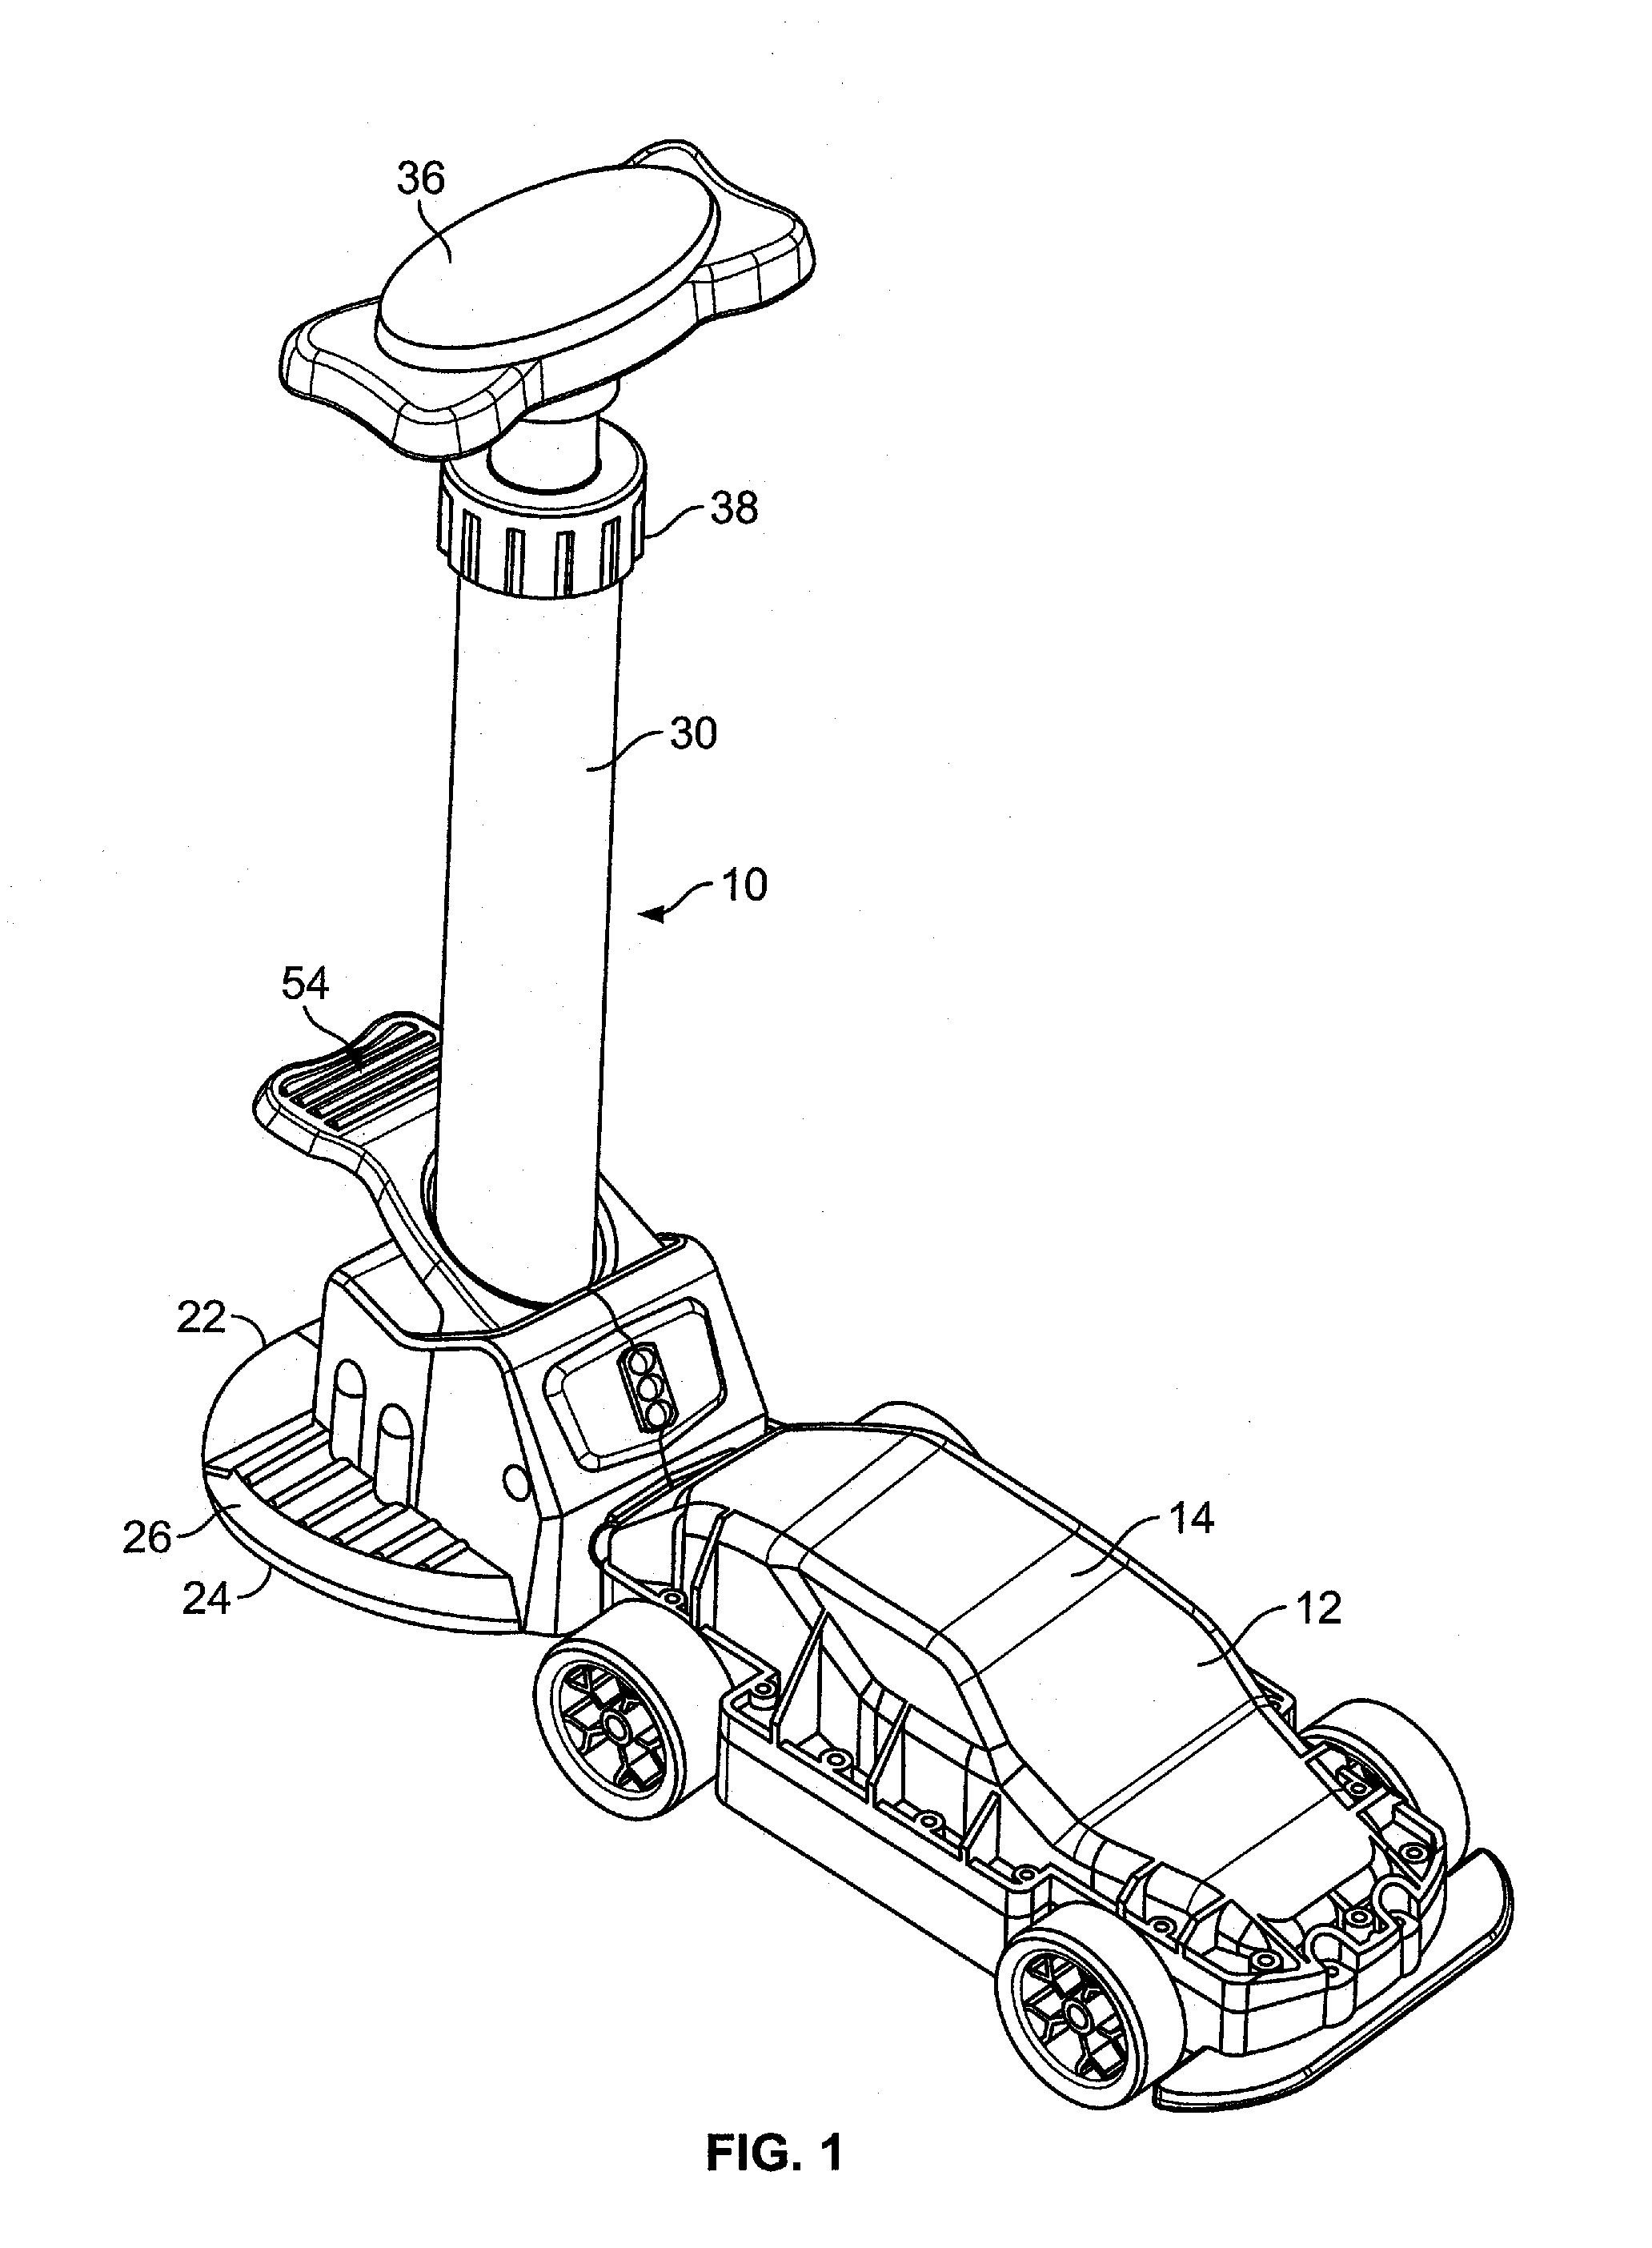 Pneumatic pump and vehicle